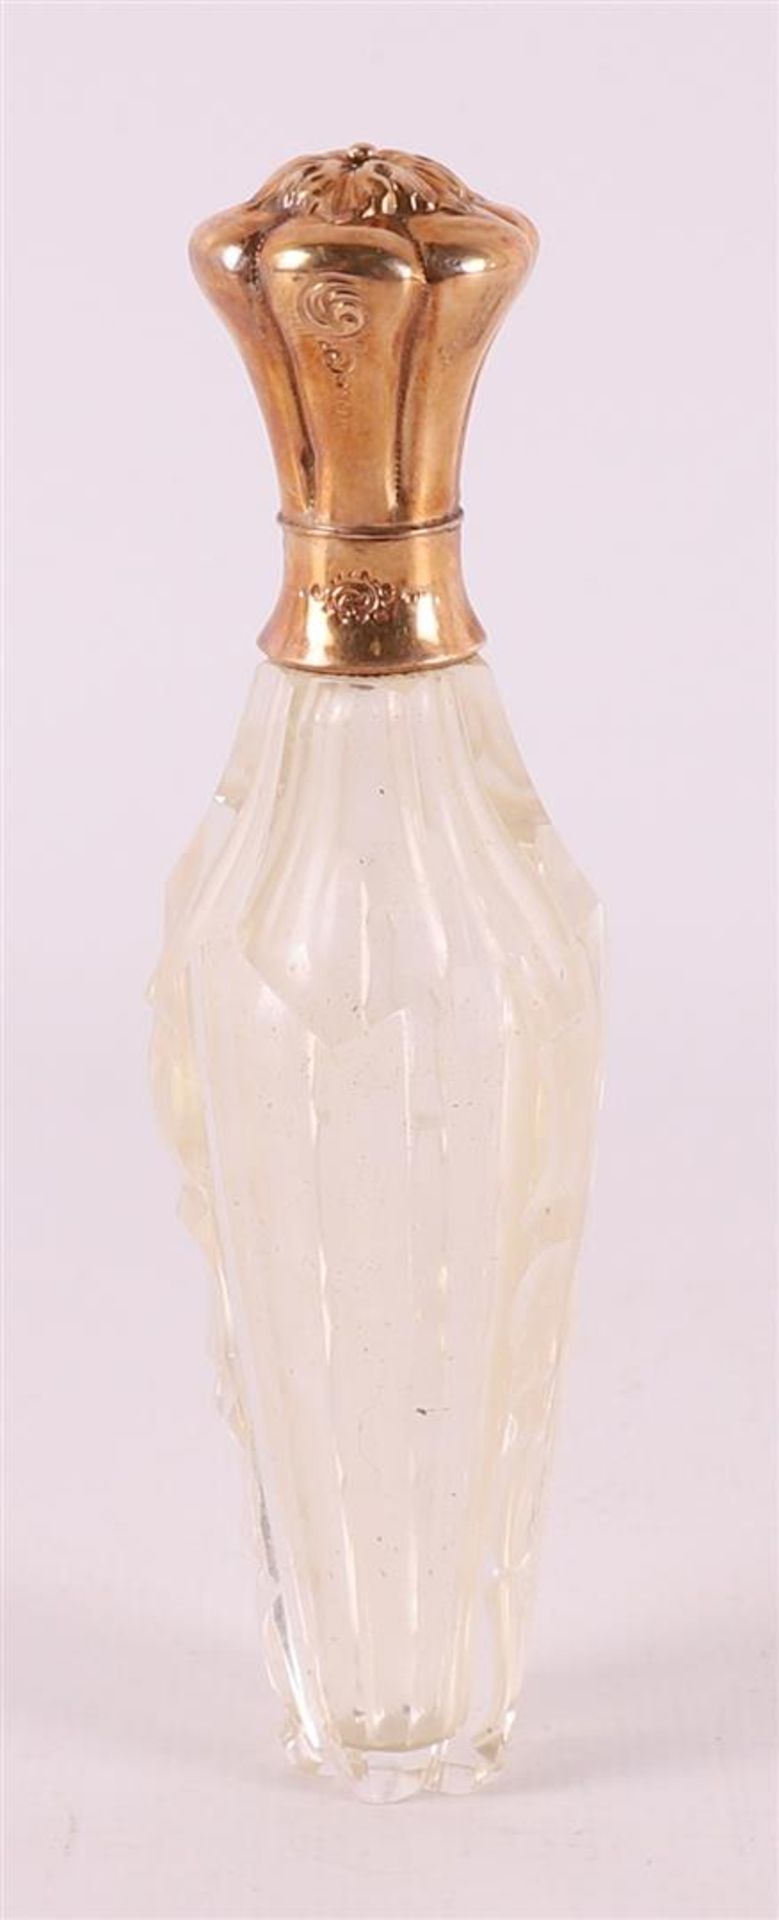 A clear crystal odor flask with gold lid, 19th century. - Image 2 of 4